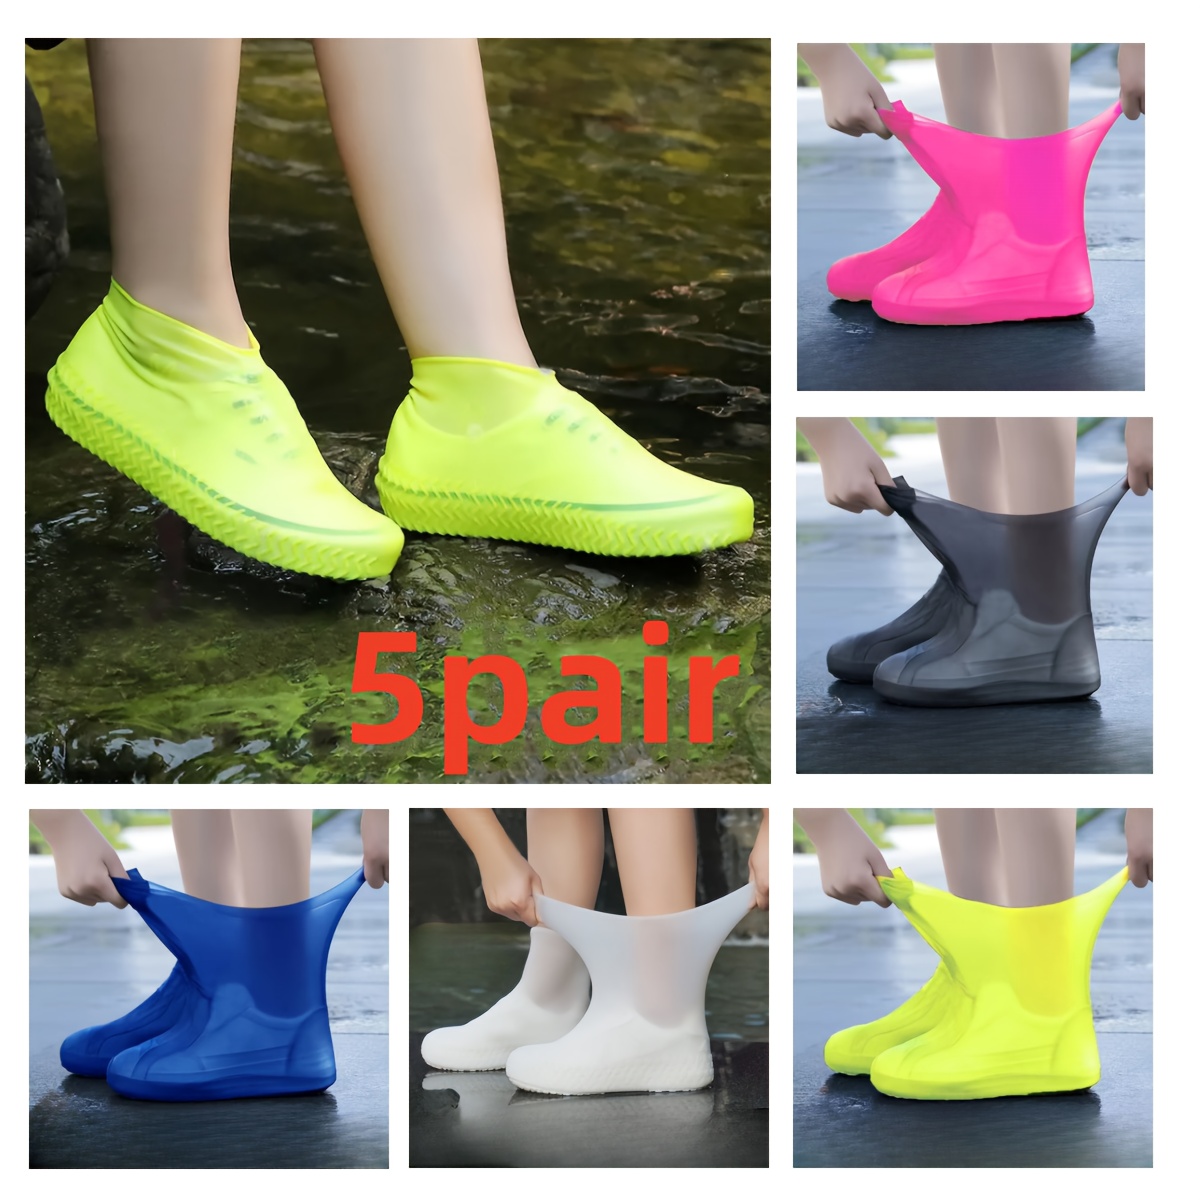 

5 Pair Of Outdoor Latex Rain Boots Waterproof Shoe Cover That Can Be Reused For Rain Prevention. Multiple Colors To Choose From, Durable